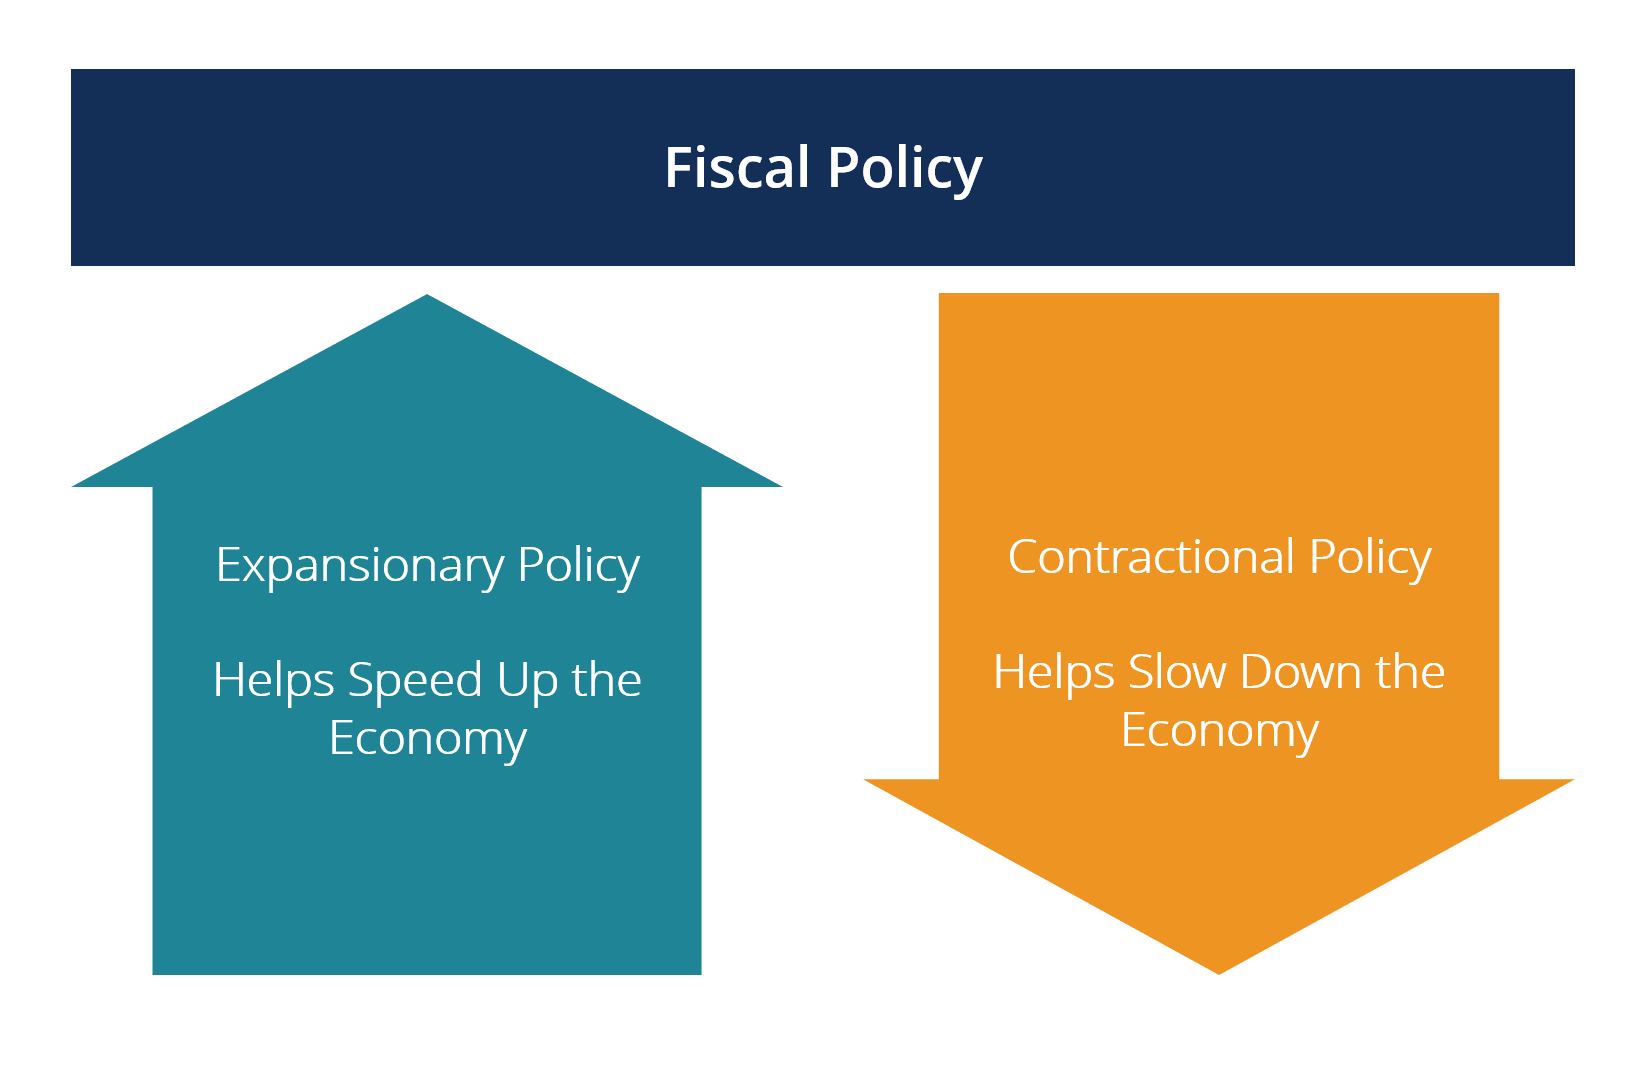 Fiscal Policy Overview, Origins, How it Works